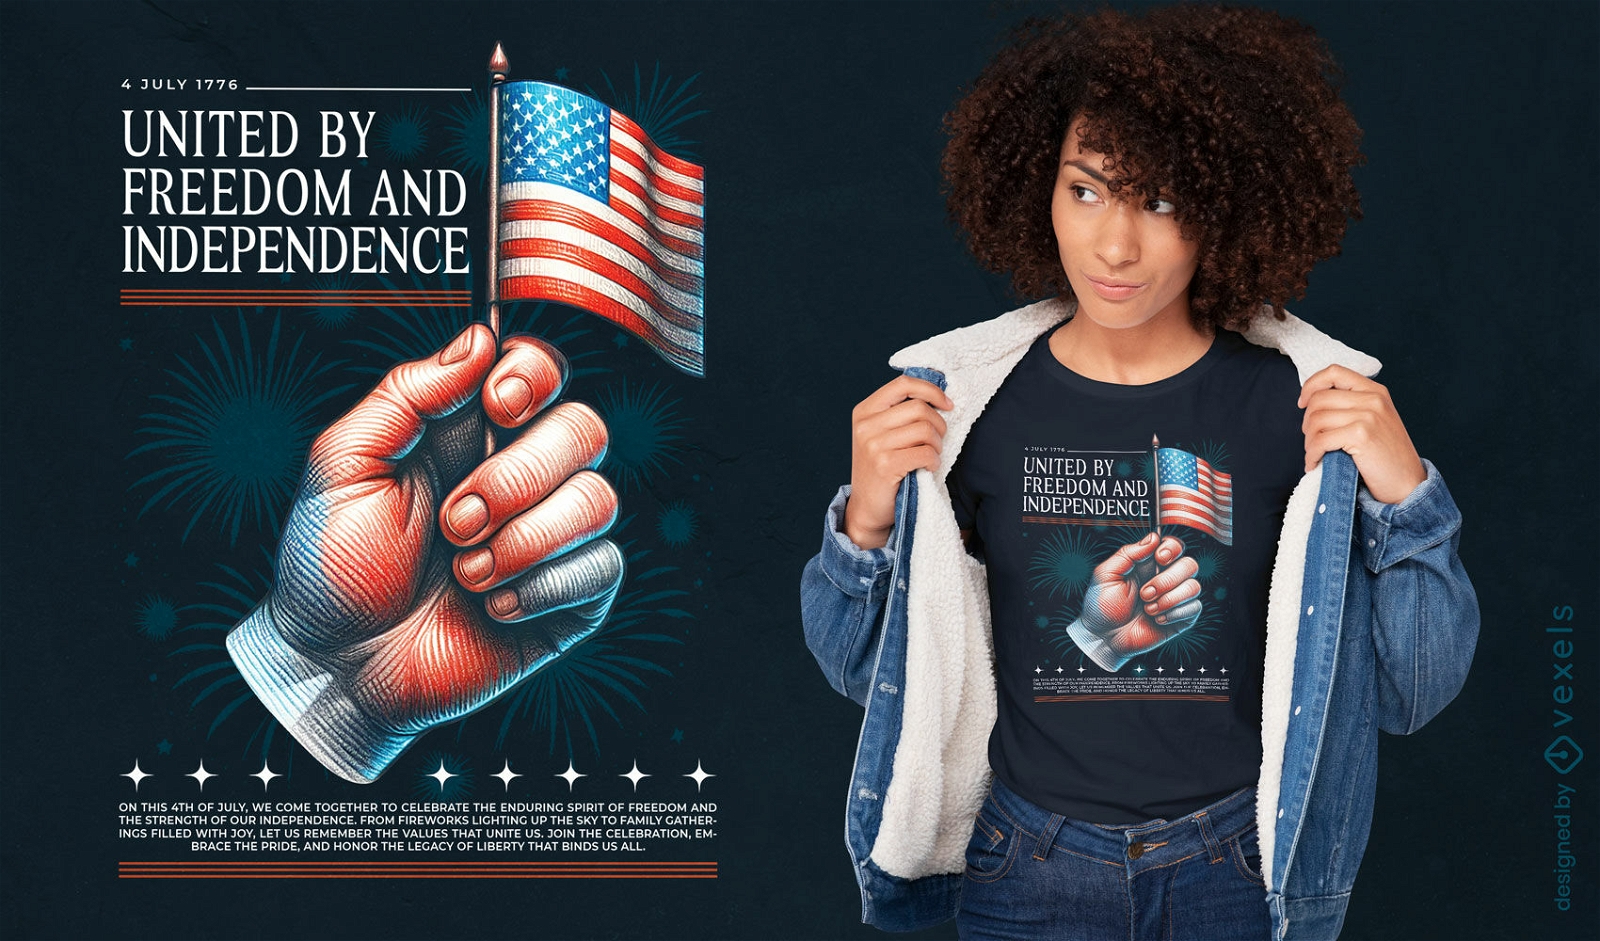 By love and liberty and justice for all t-shirt design